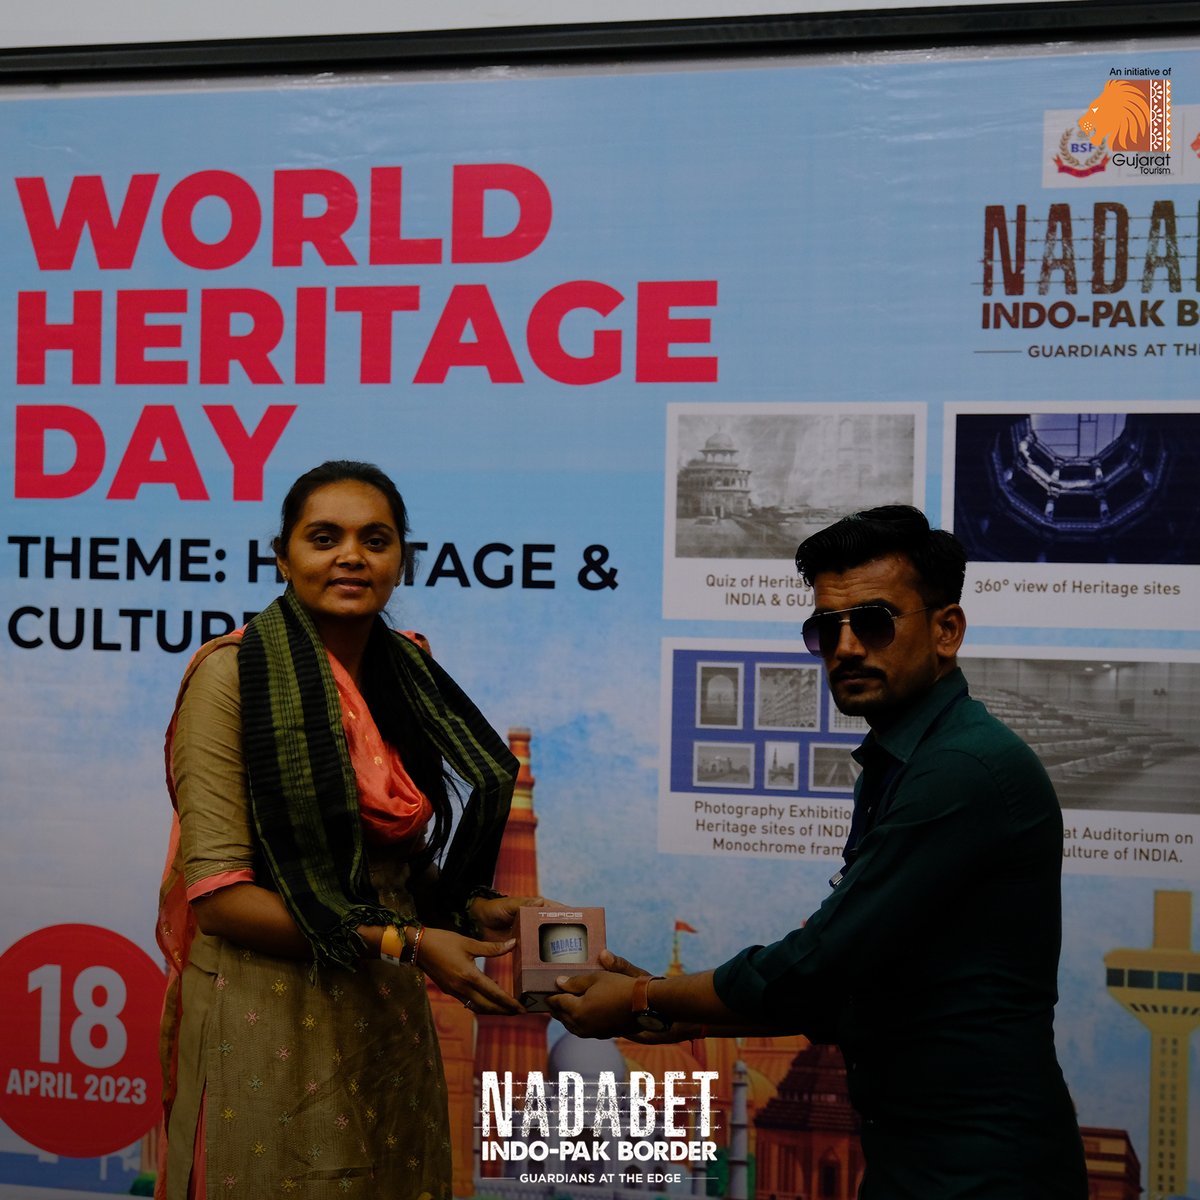 An interactive session on the occasion of World Heritage Day was conducted at the Nadabet Indo-Pak Border. 

#WorldHeritageDay #WorldHeritageDay2023 #HeritageDay #culturalheritage #visitnadabet #IndoPakBorder #NadabetBorder #gujarattourism #exploregujarat #incredibleindia